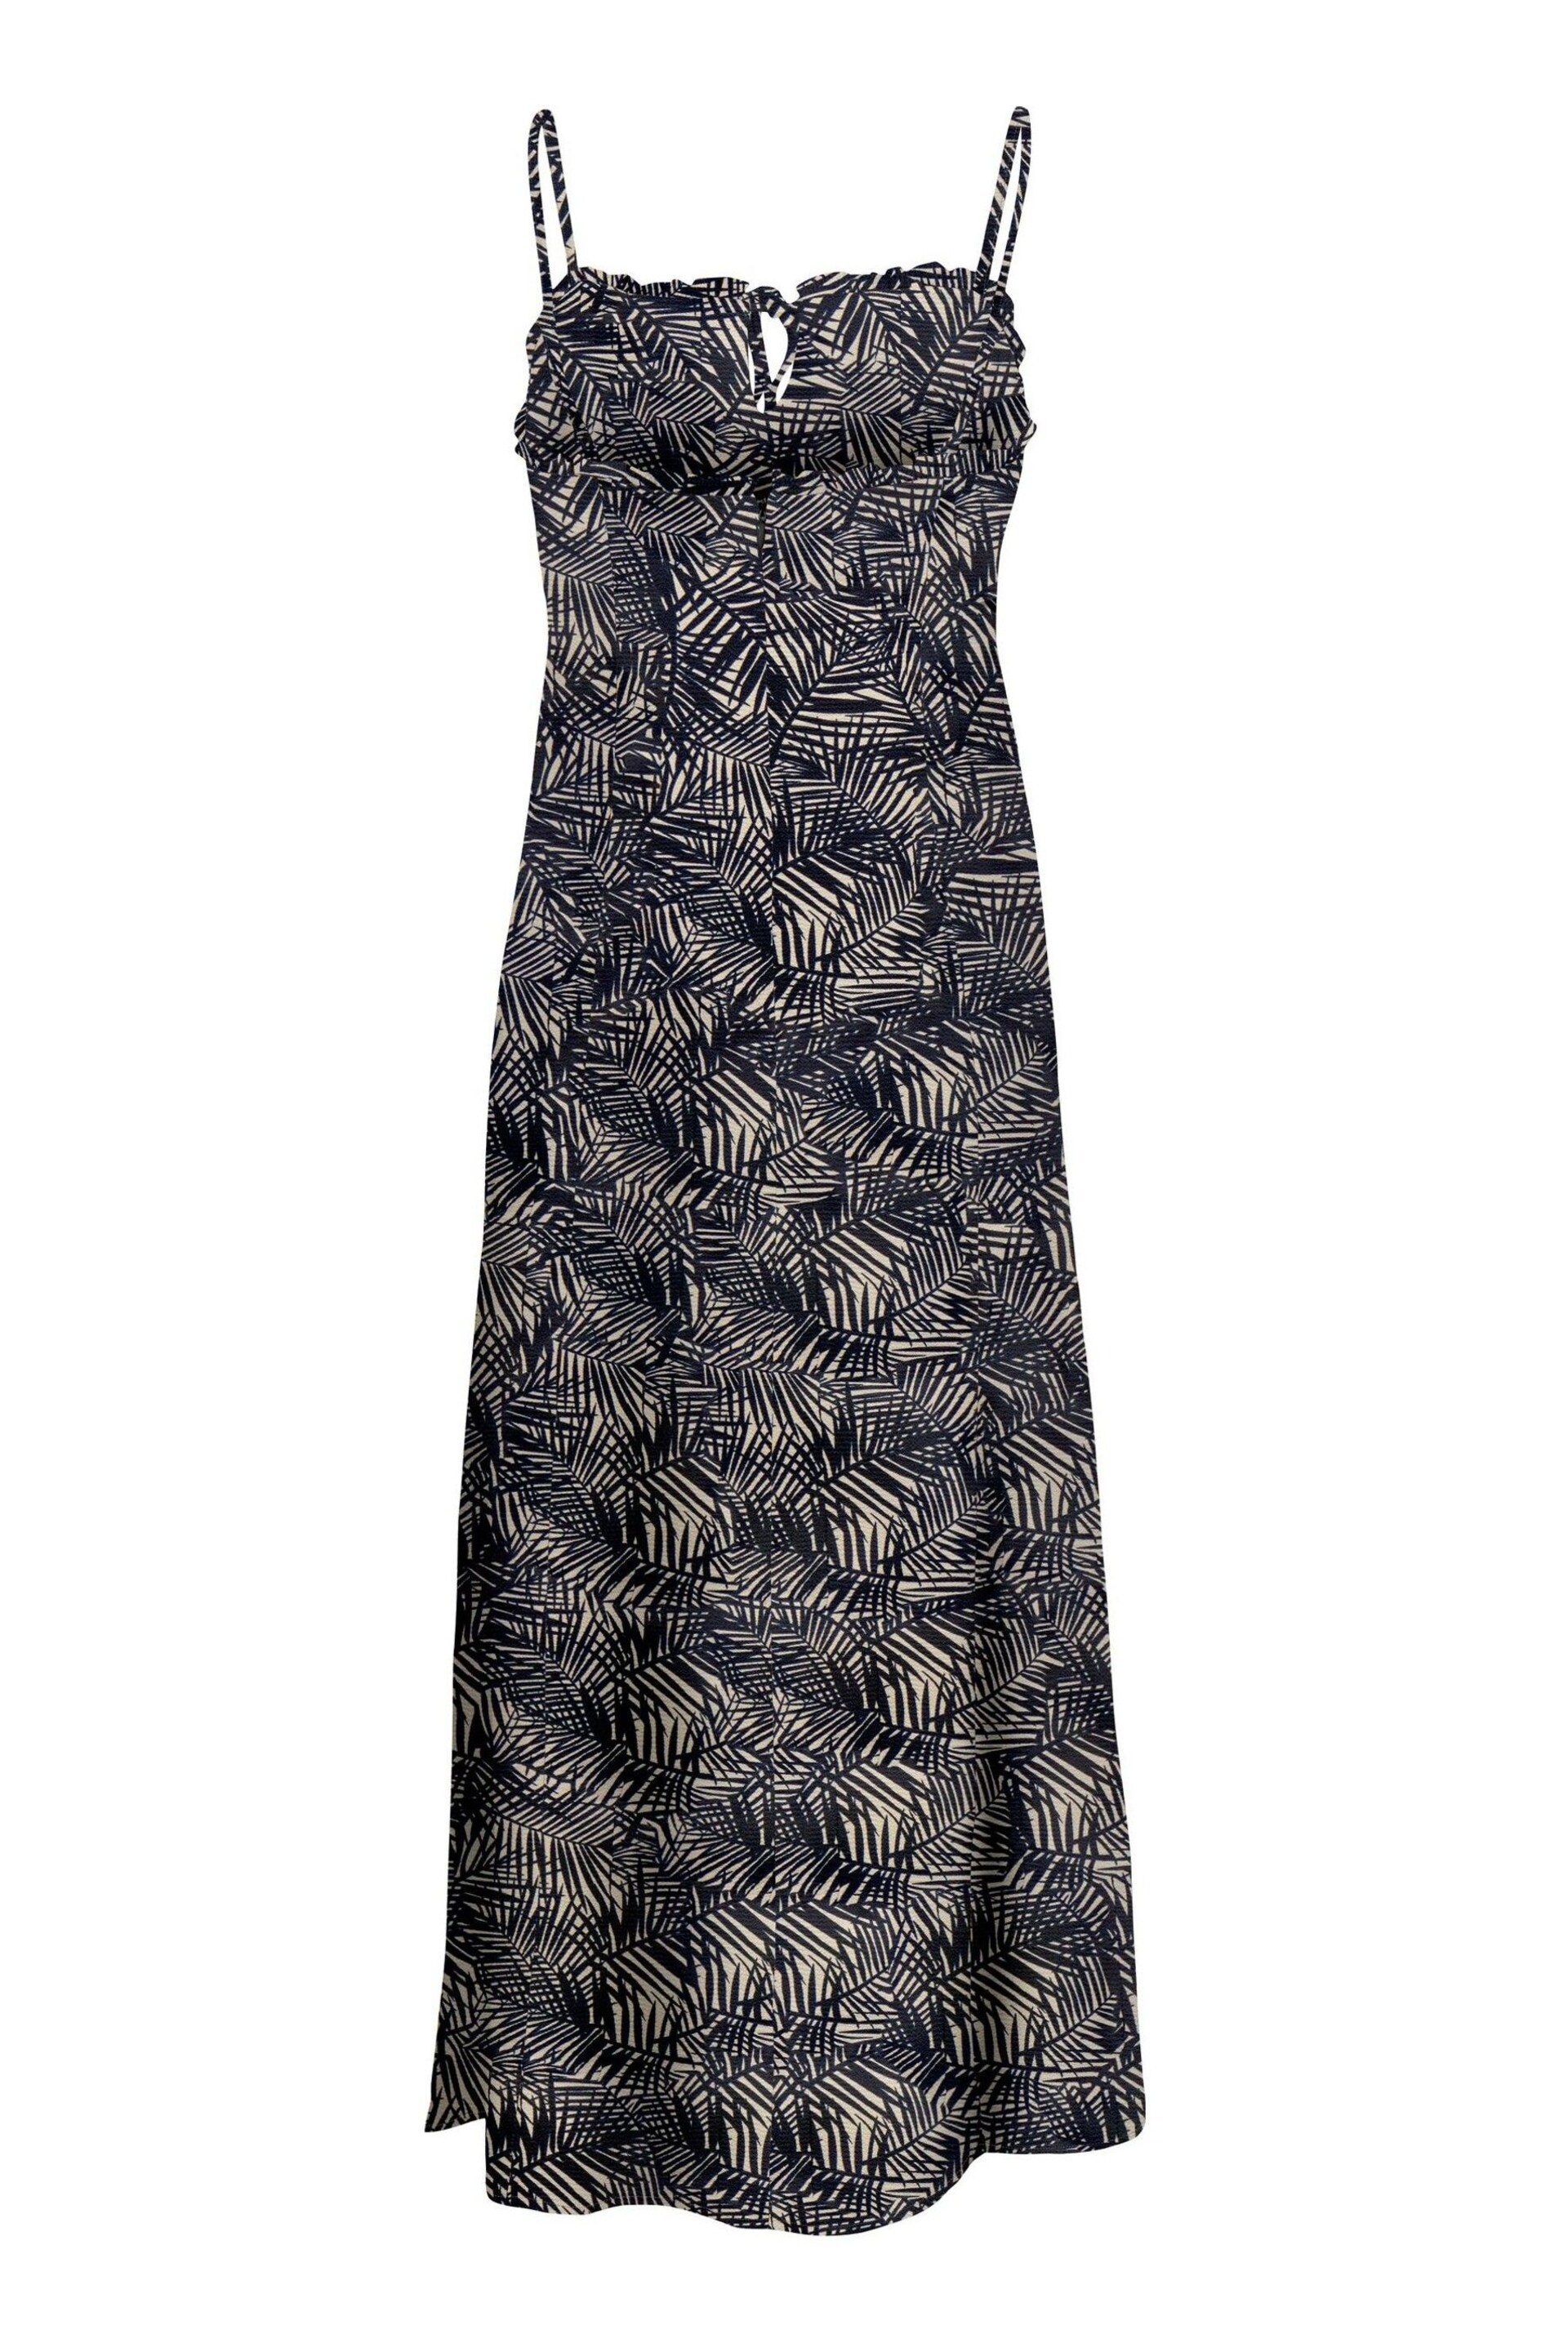 ONLY Blue Palm Print Cami Ruched Midi Dress - Image 6 of 9